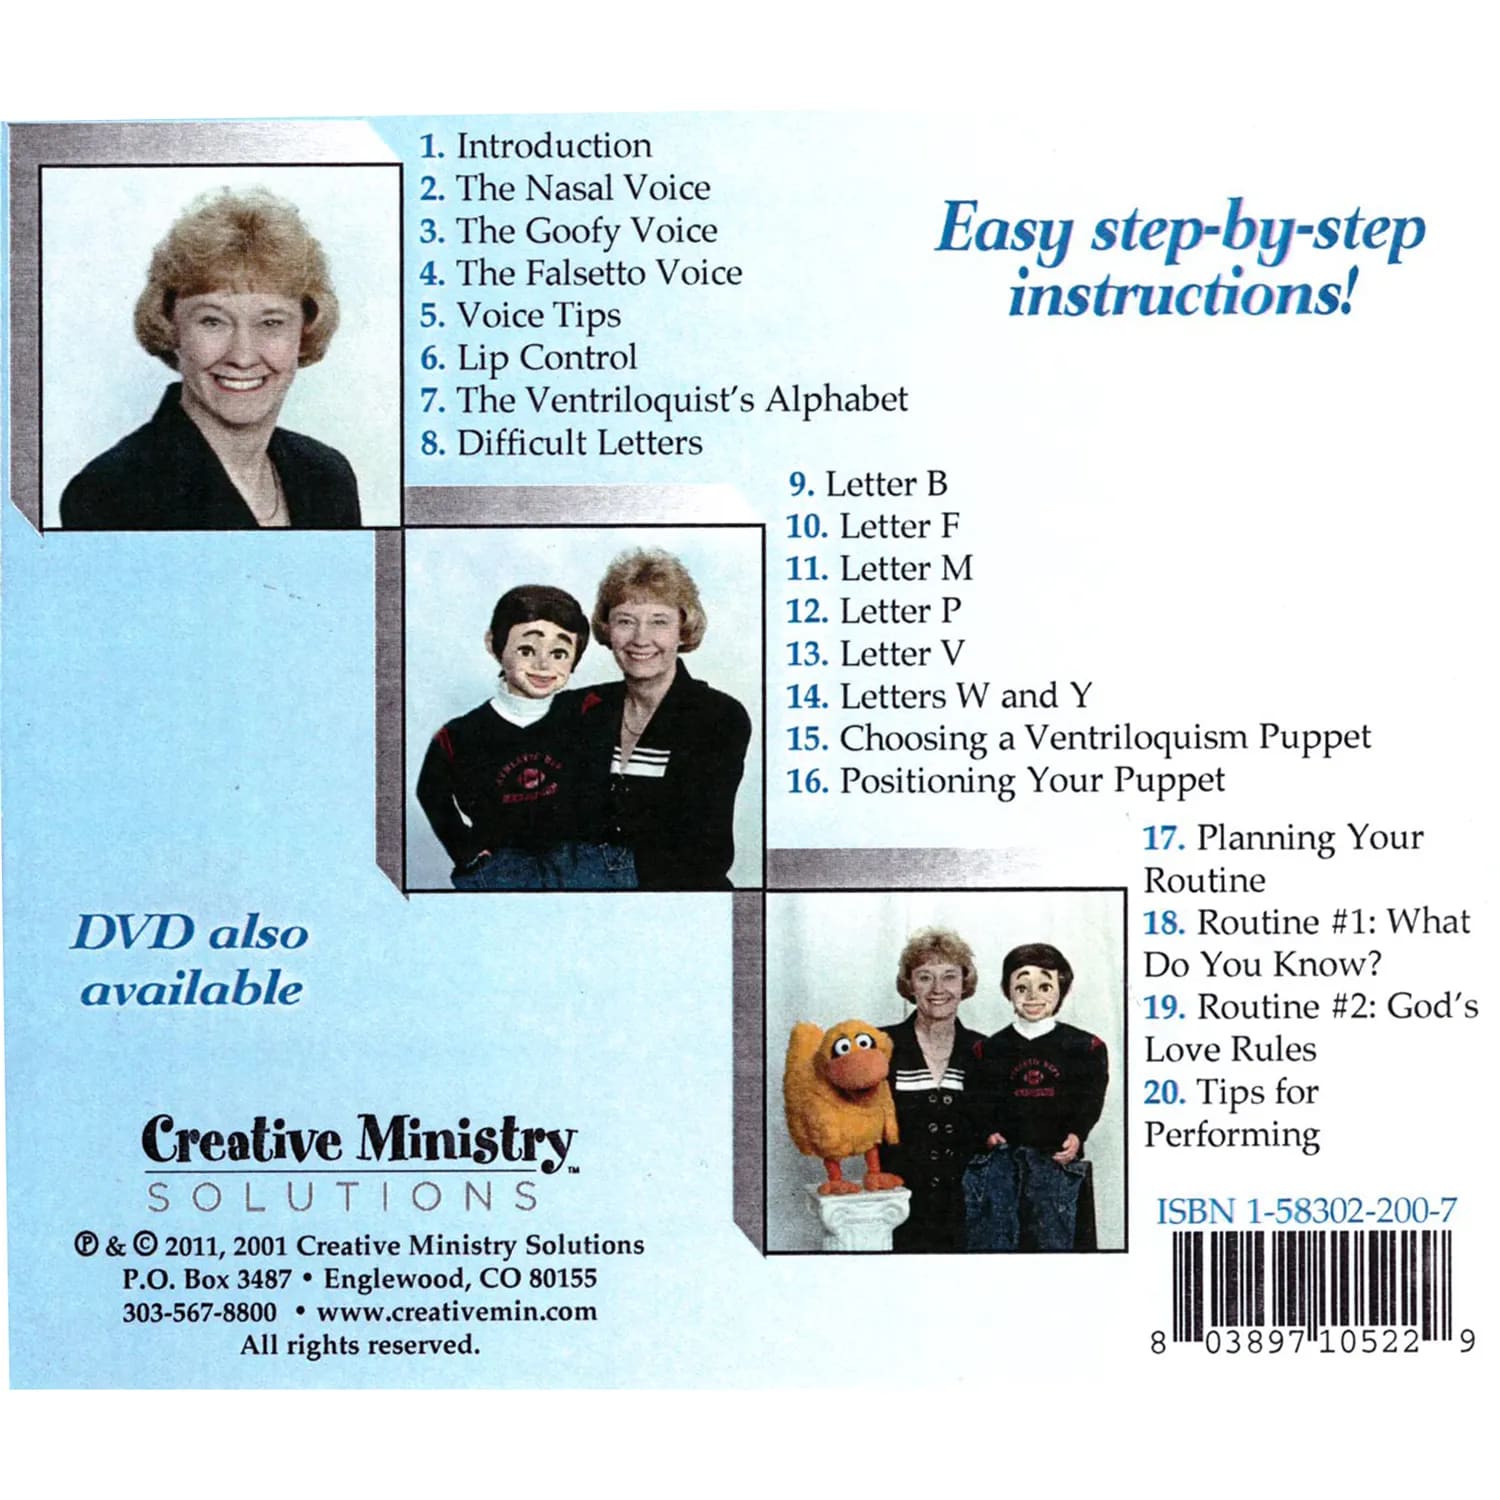 Success with Ventriloquism Training CD